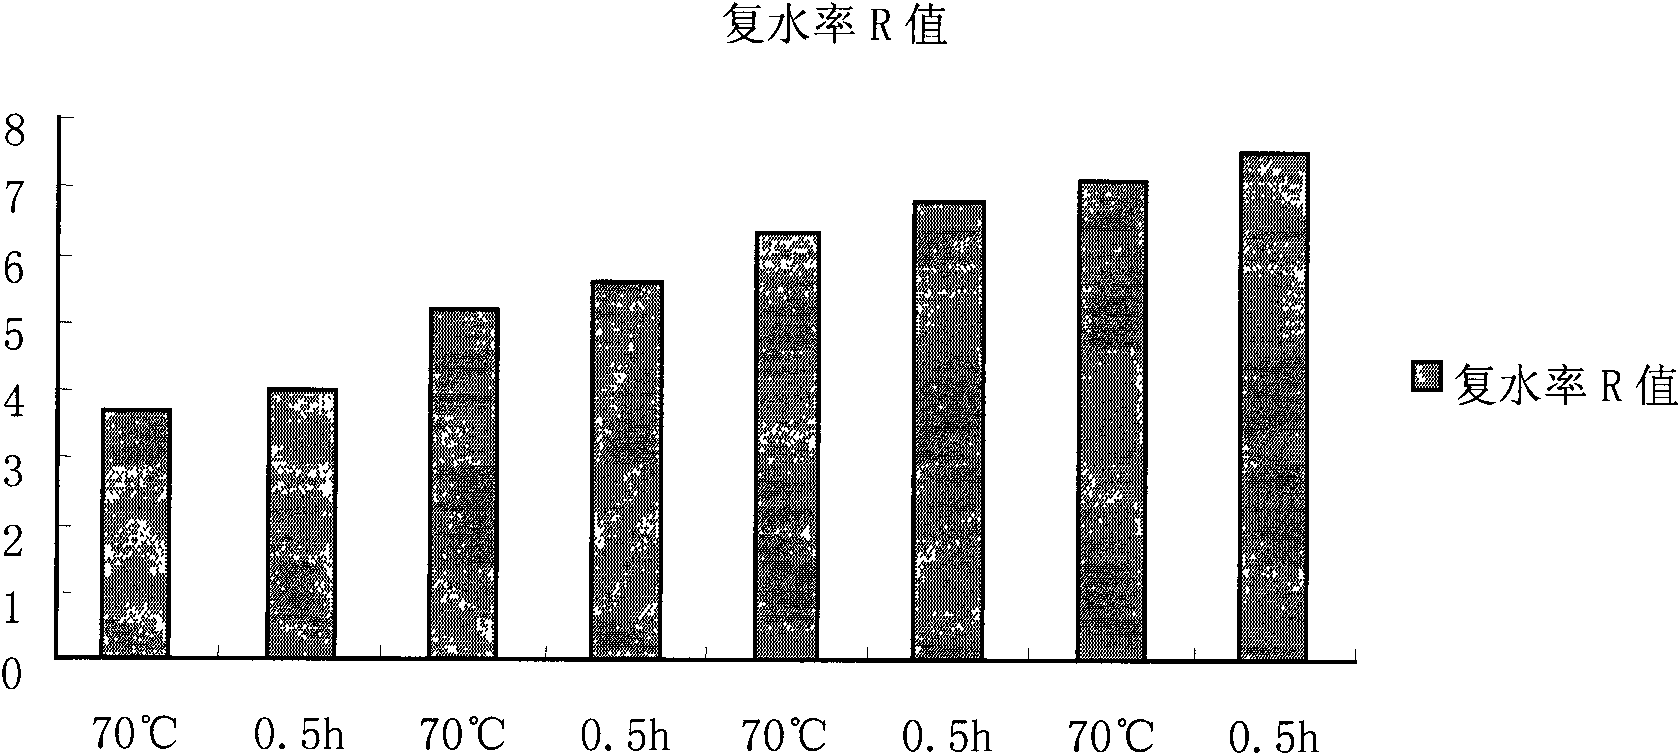 Processing method for rapidly rehydrating dried osmunds